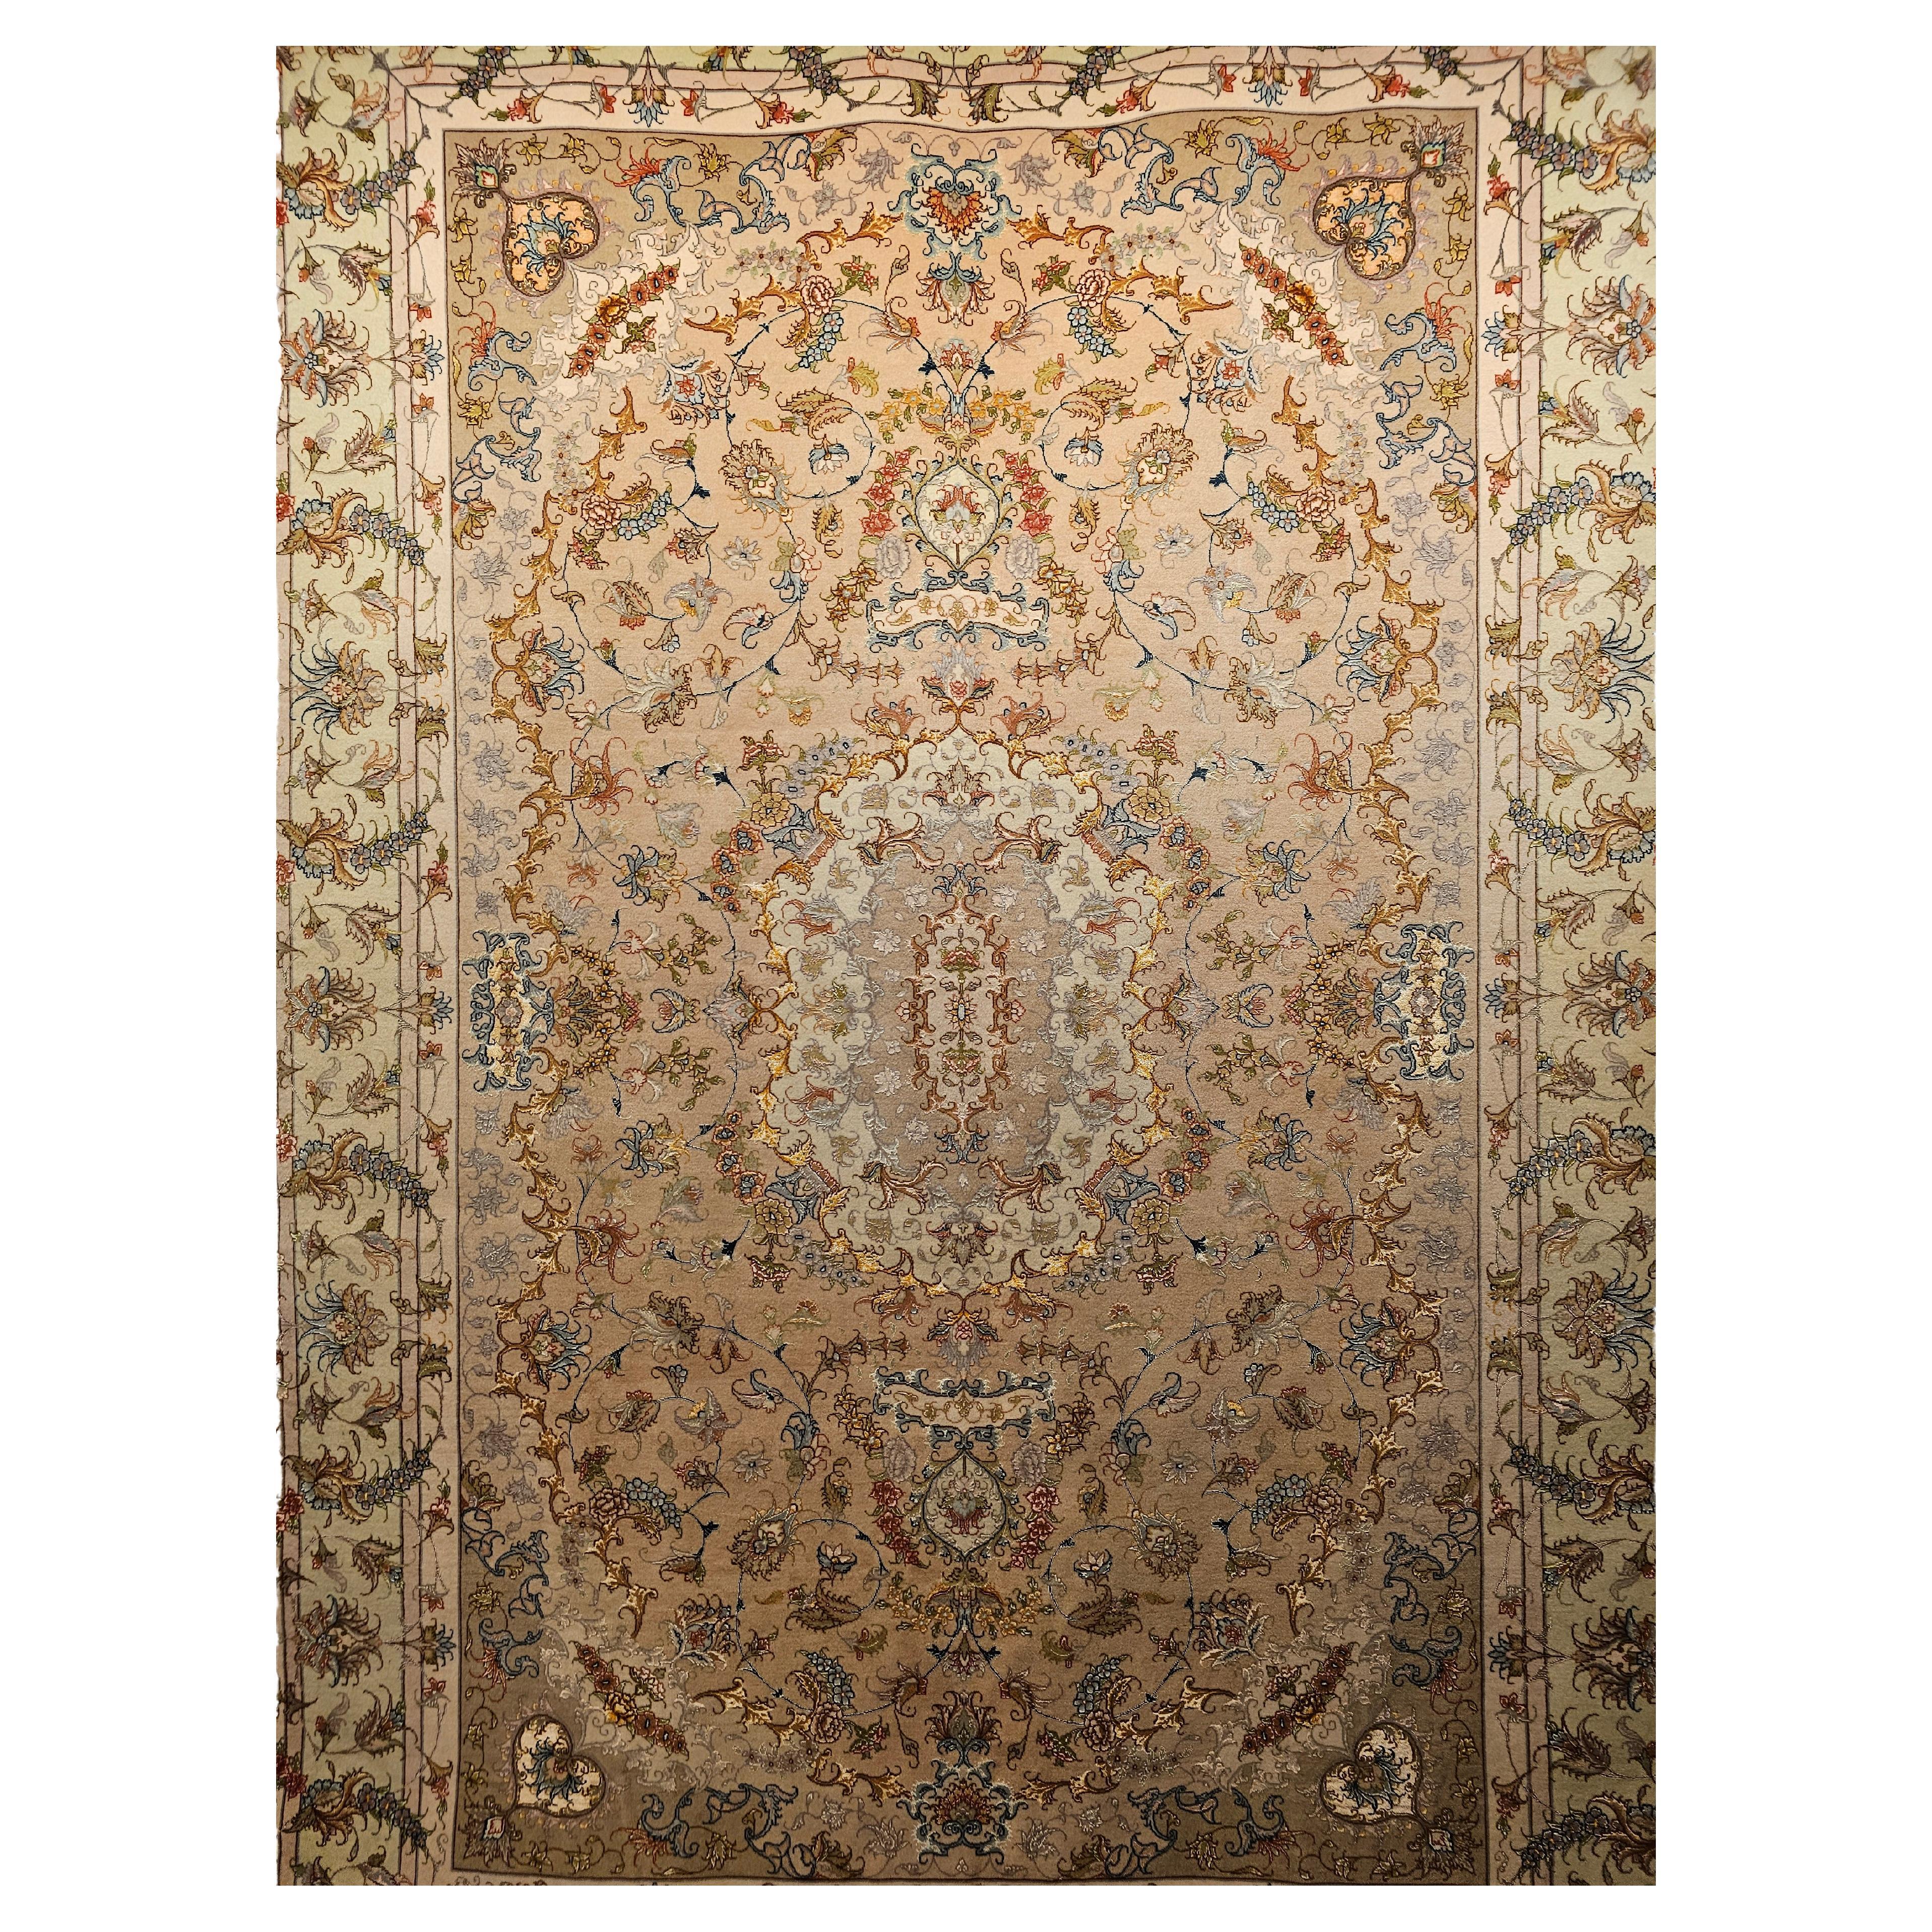 Persian Tabriz in Floral Design with Silk in Taupe, Pale Green, Camelhair